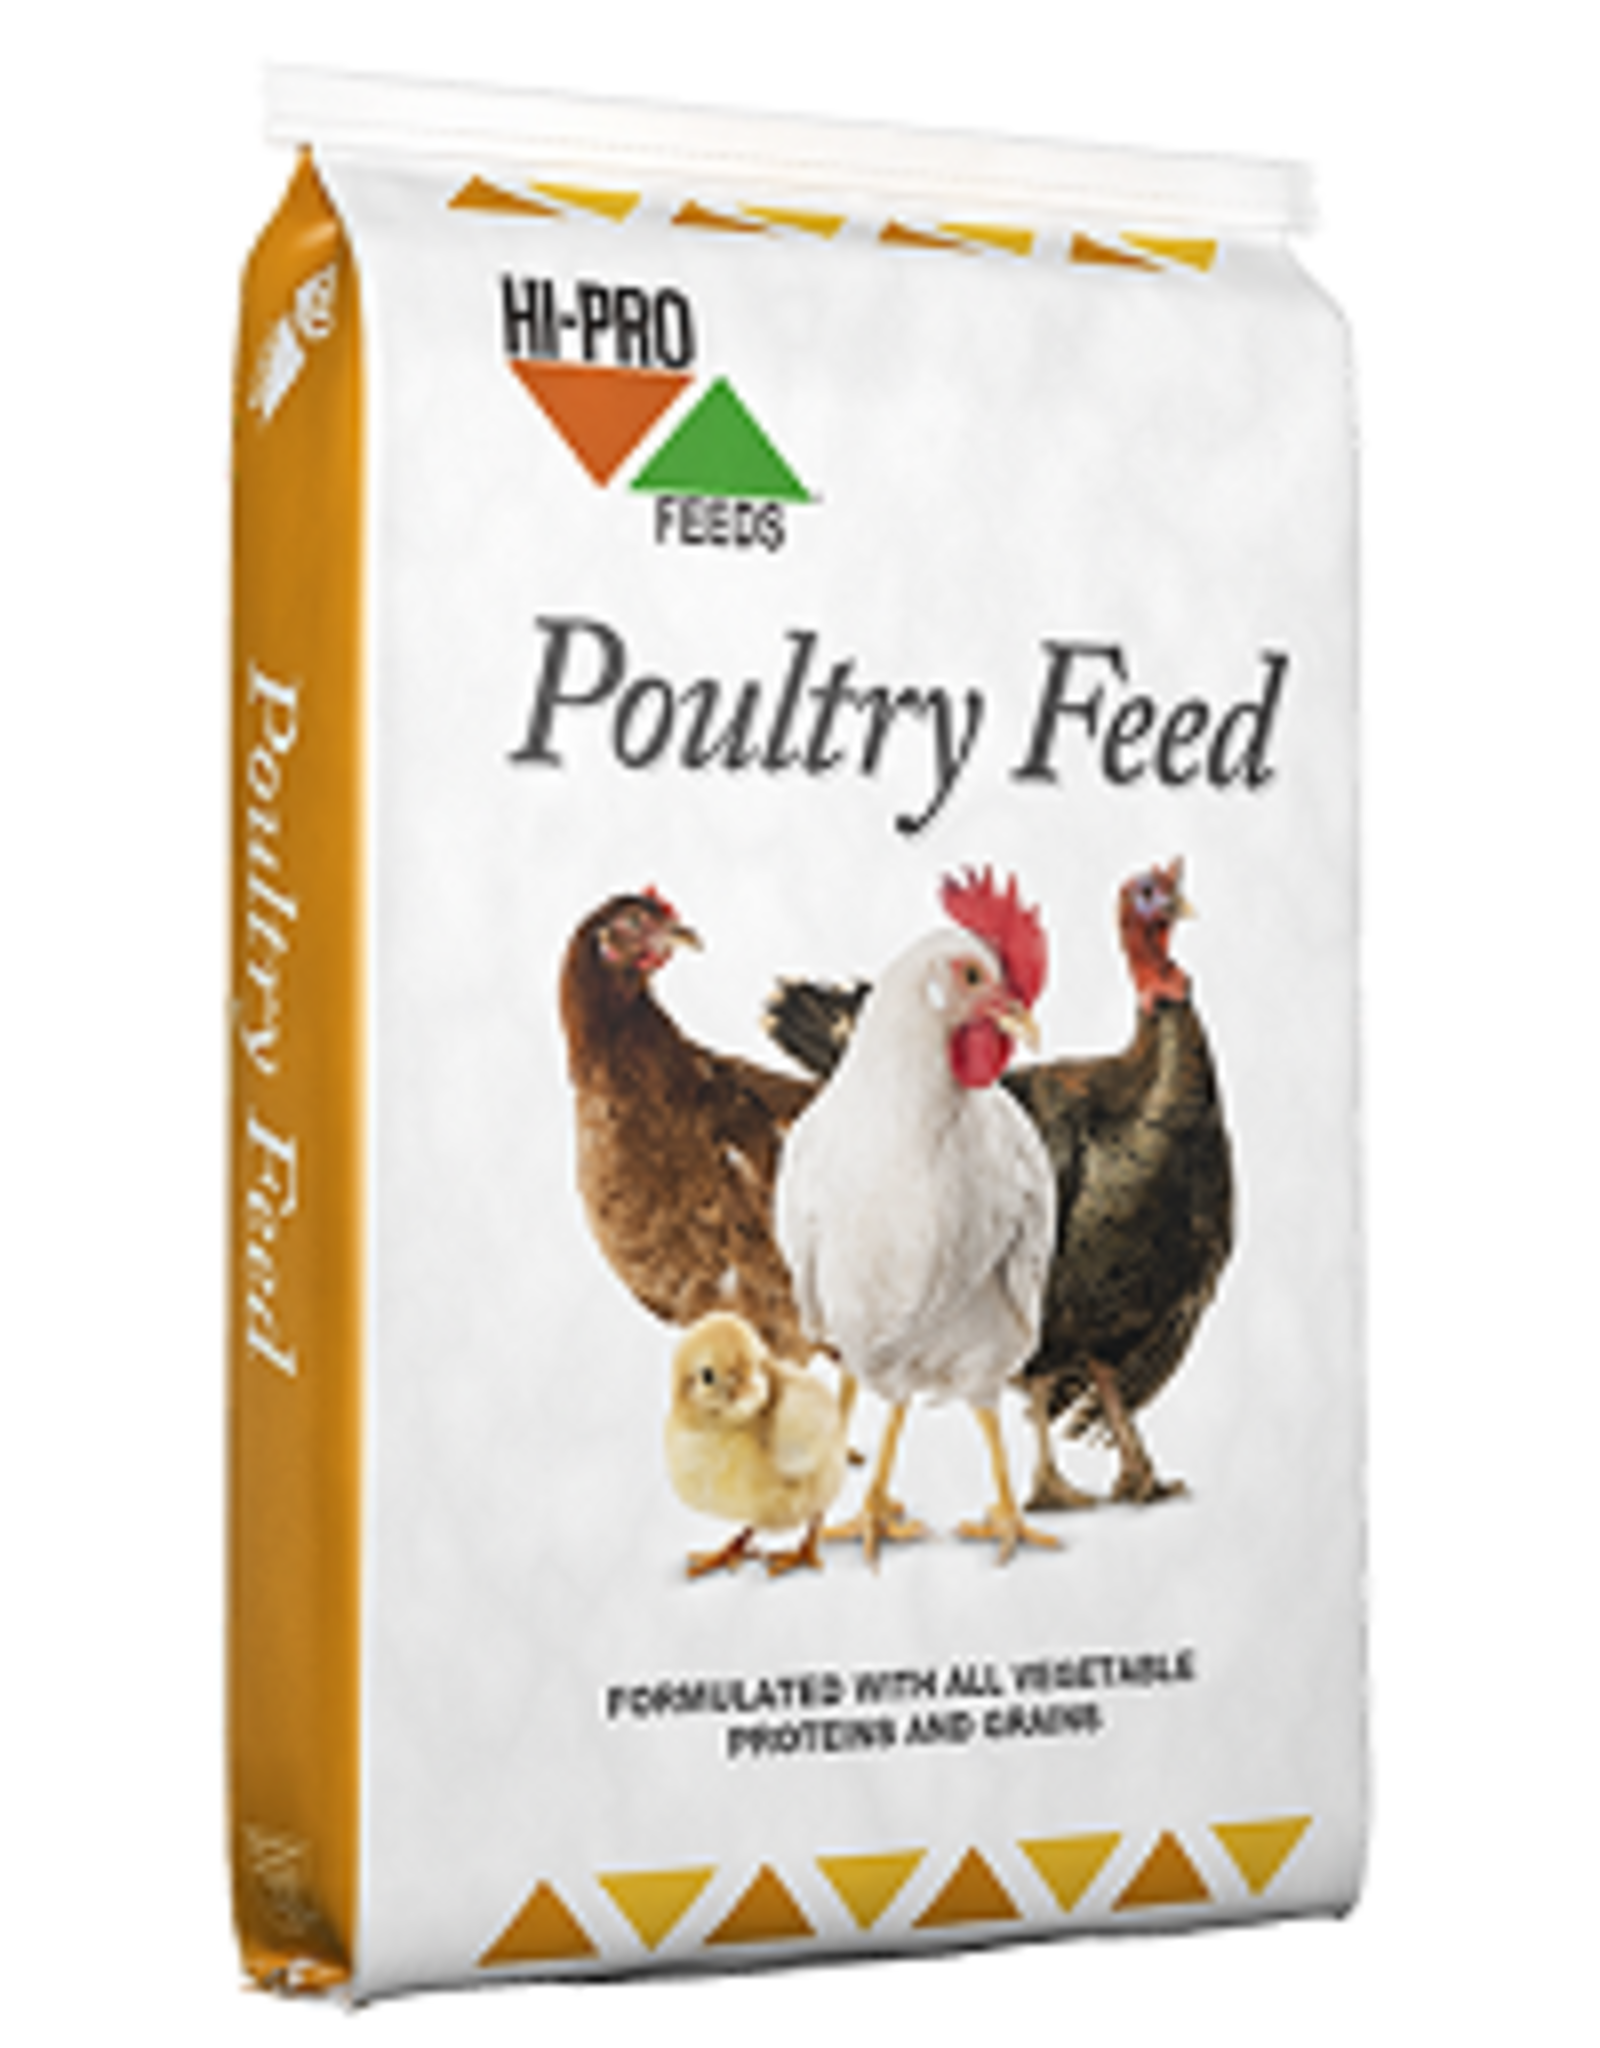 16% Chick Grower/Finisher Crumble Plain 20 kg - 12486775